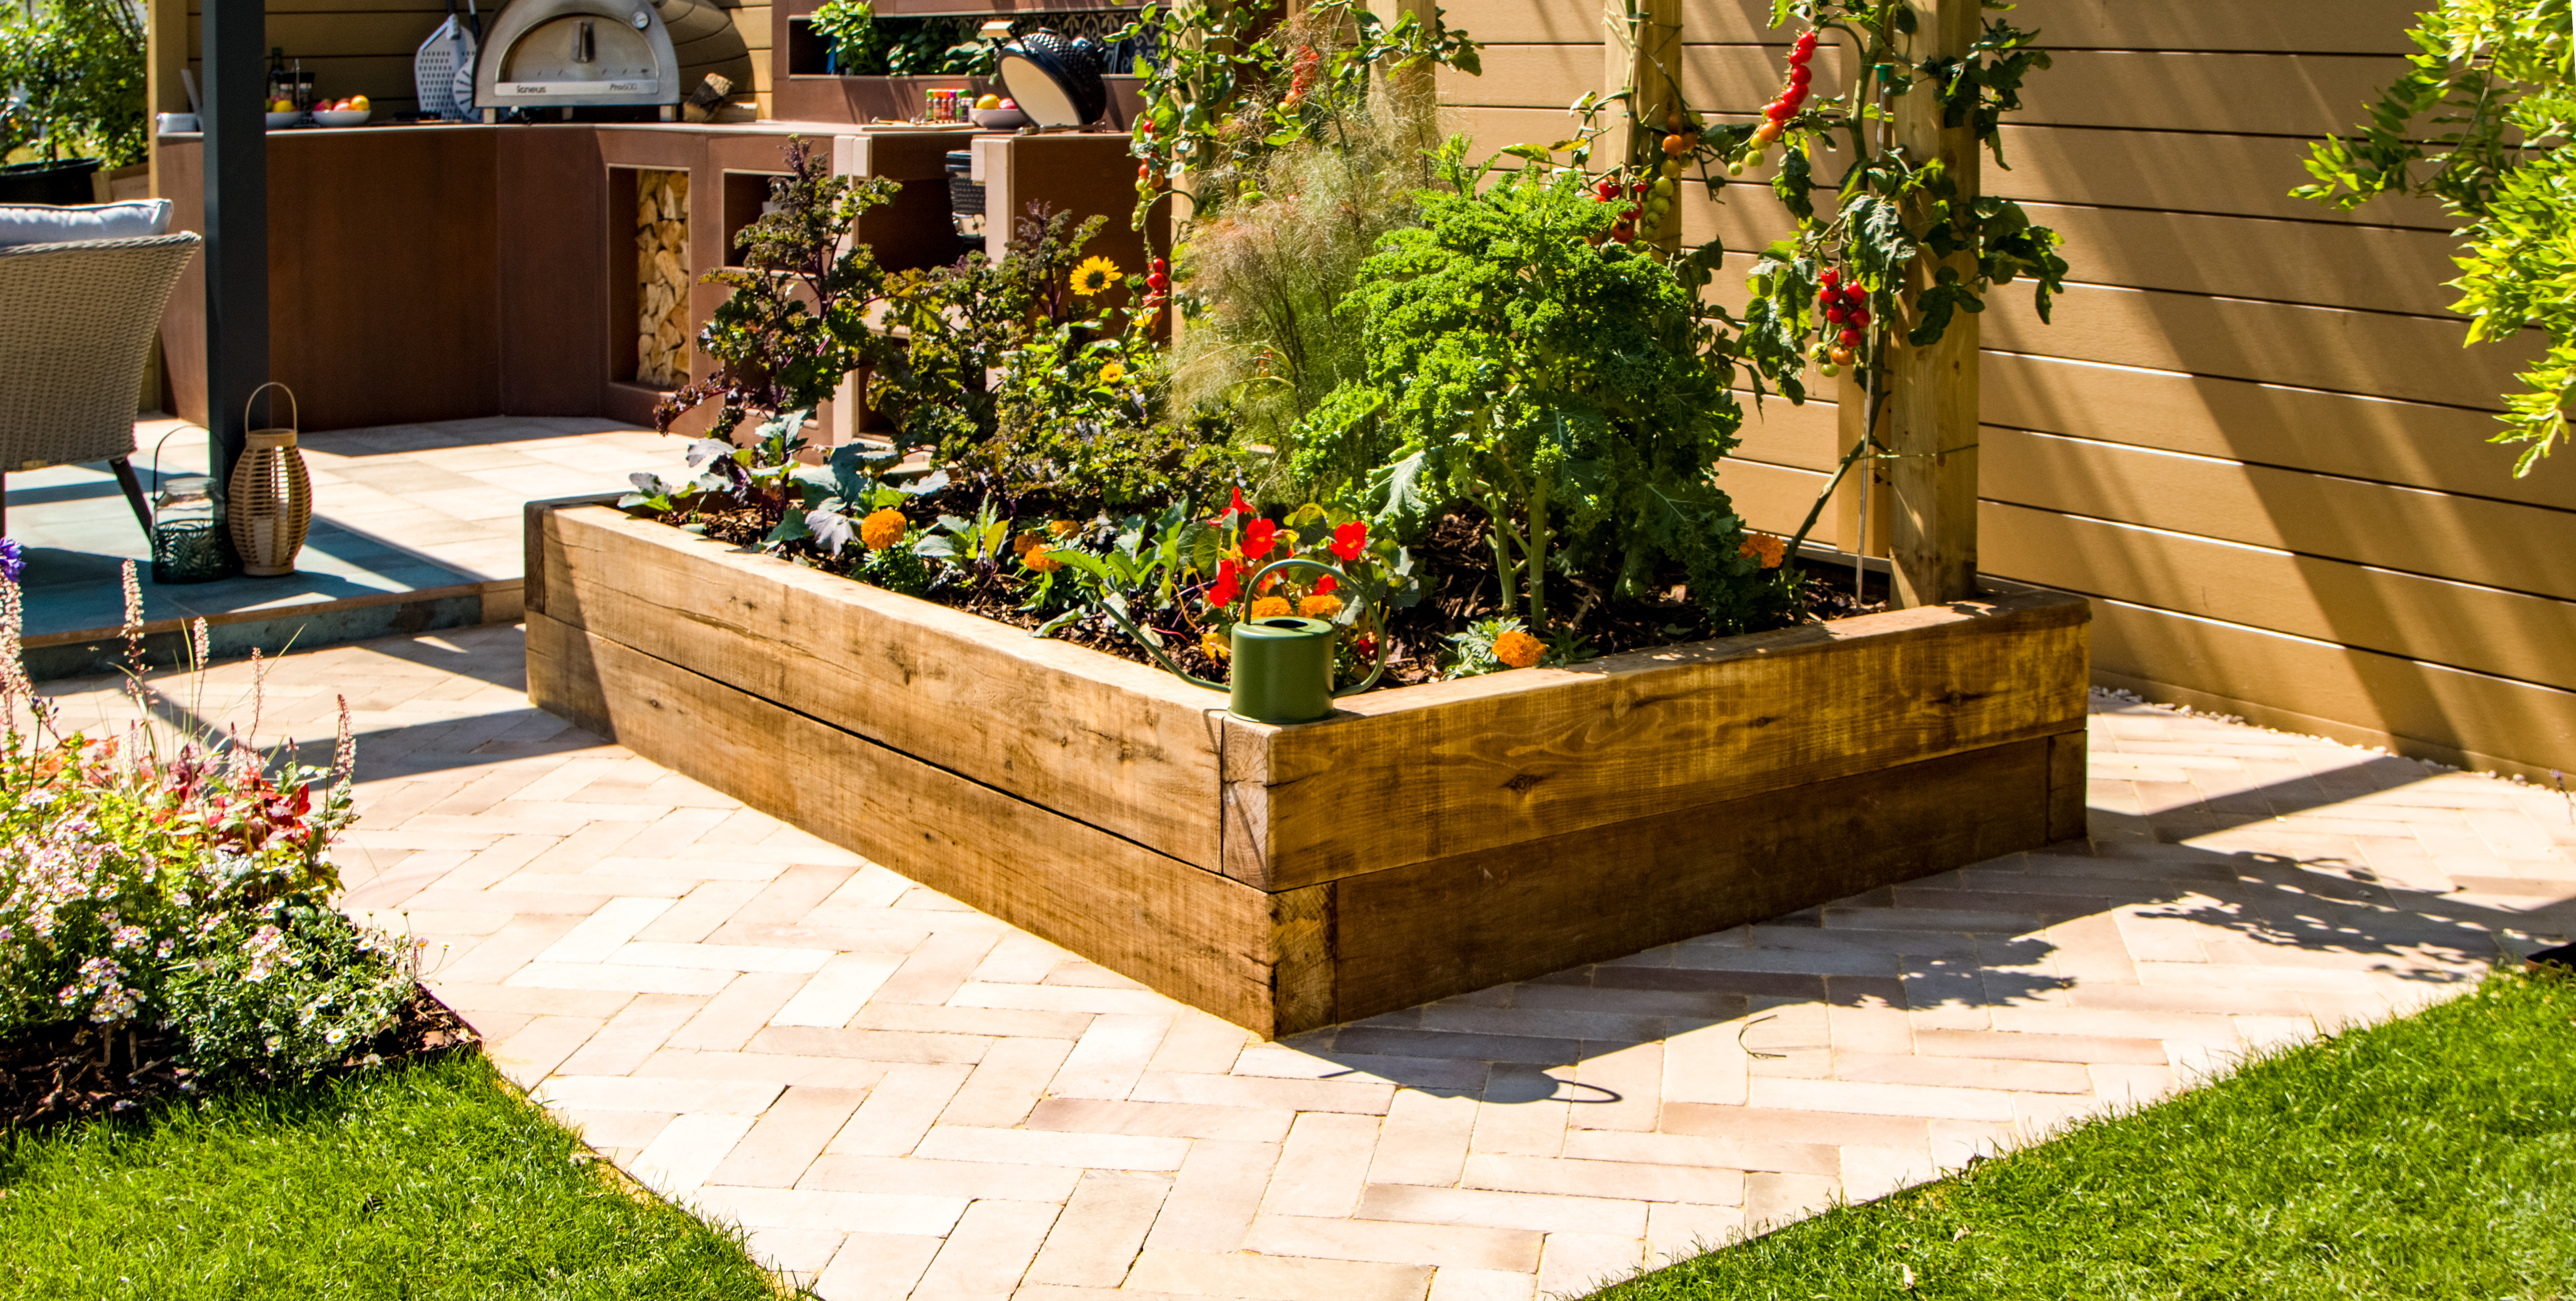 A raised bed surrounded by light paving slabs